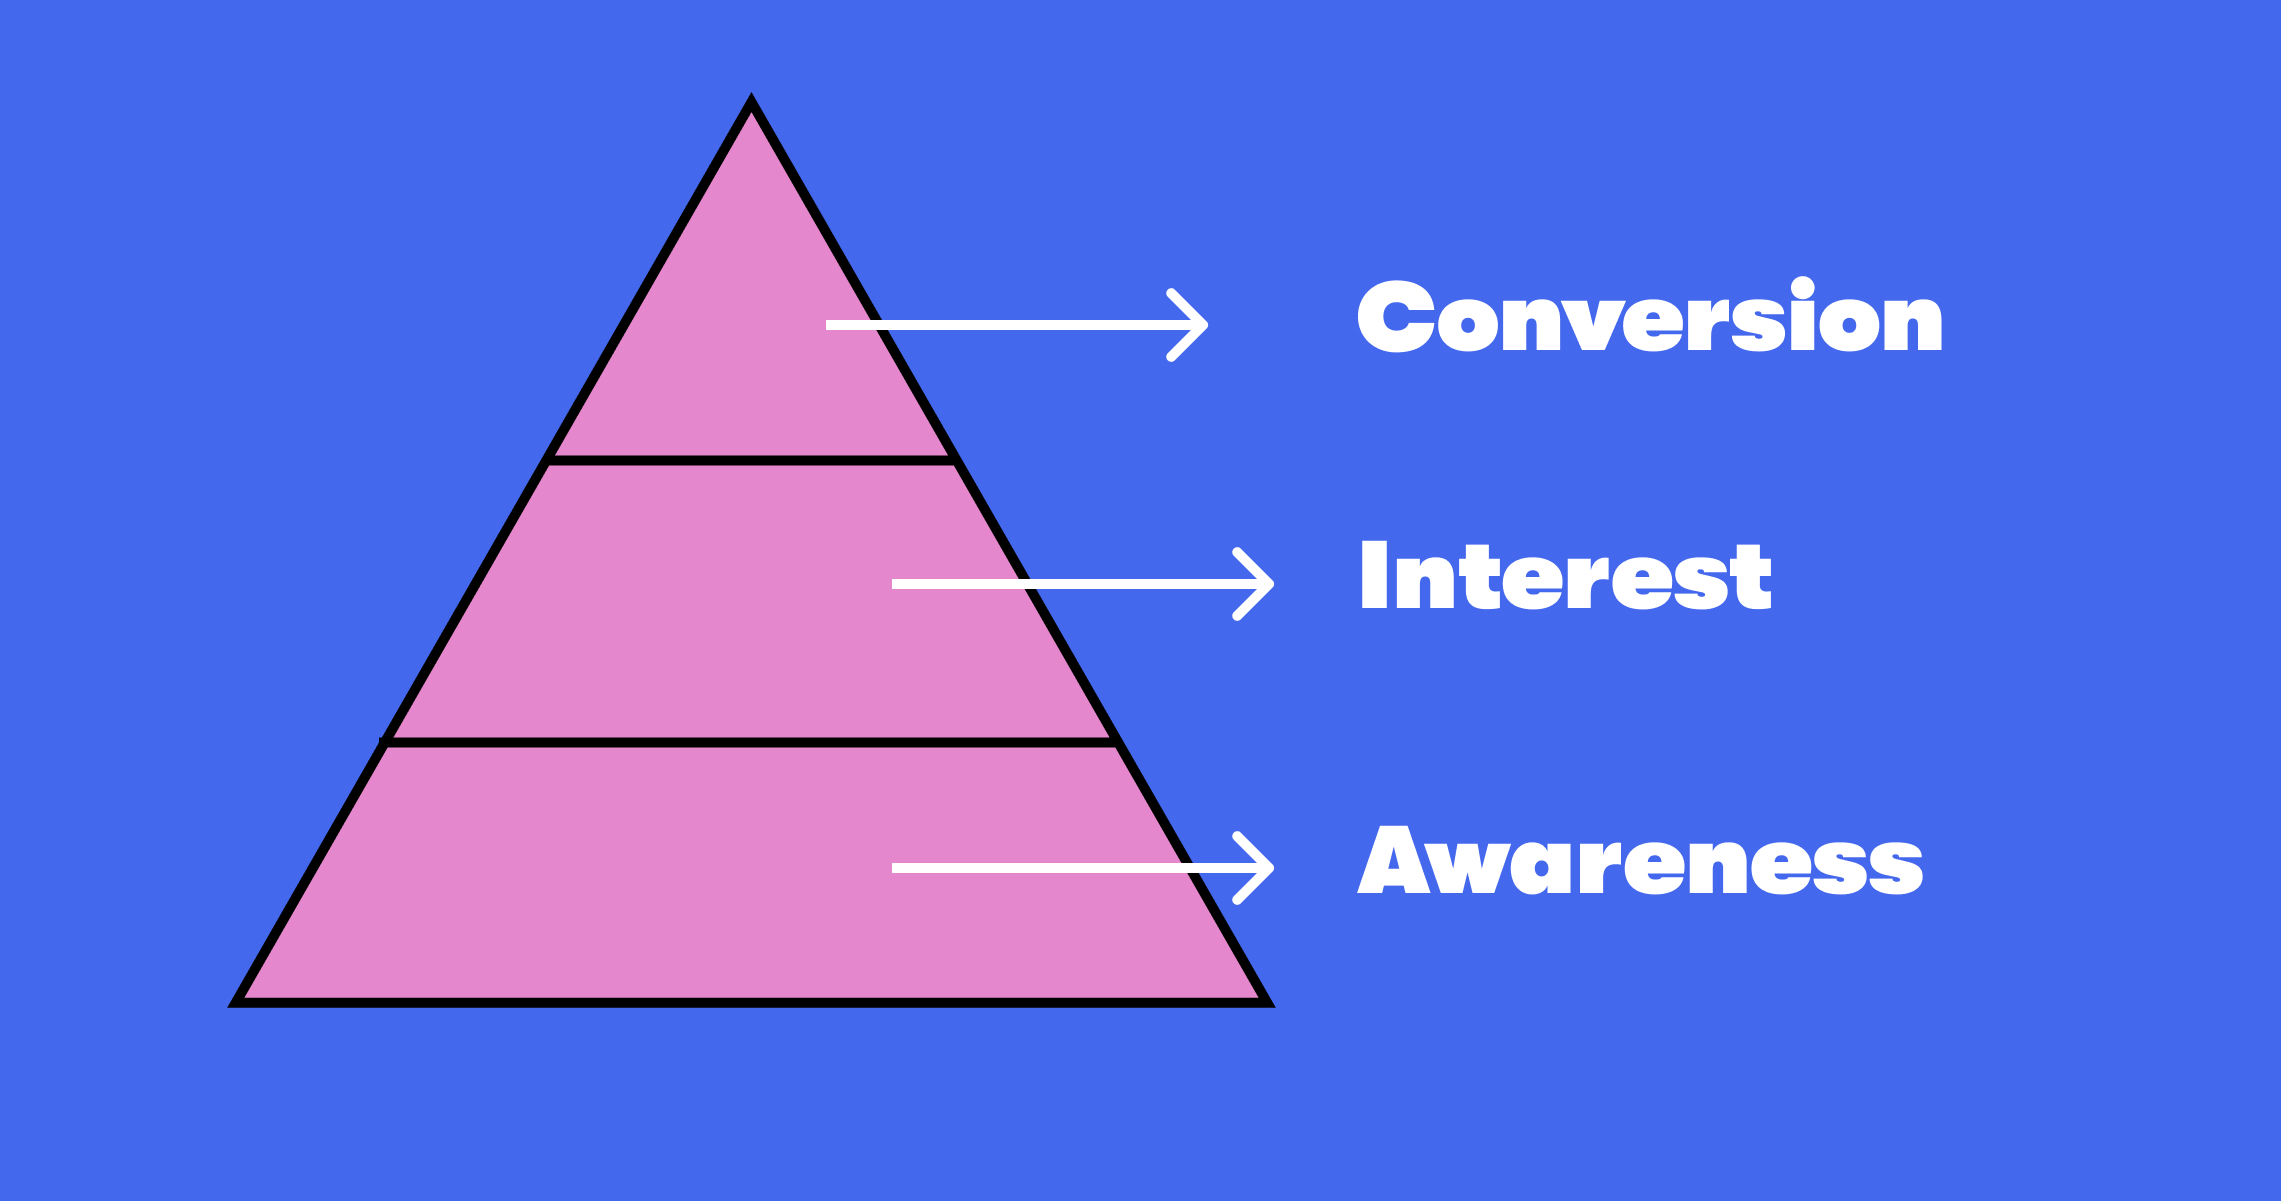 The AIC adoption, interest, conversion triangle of end user adoption.